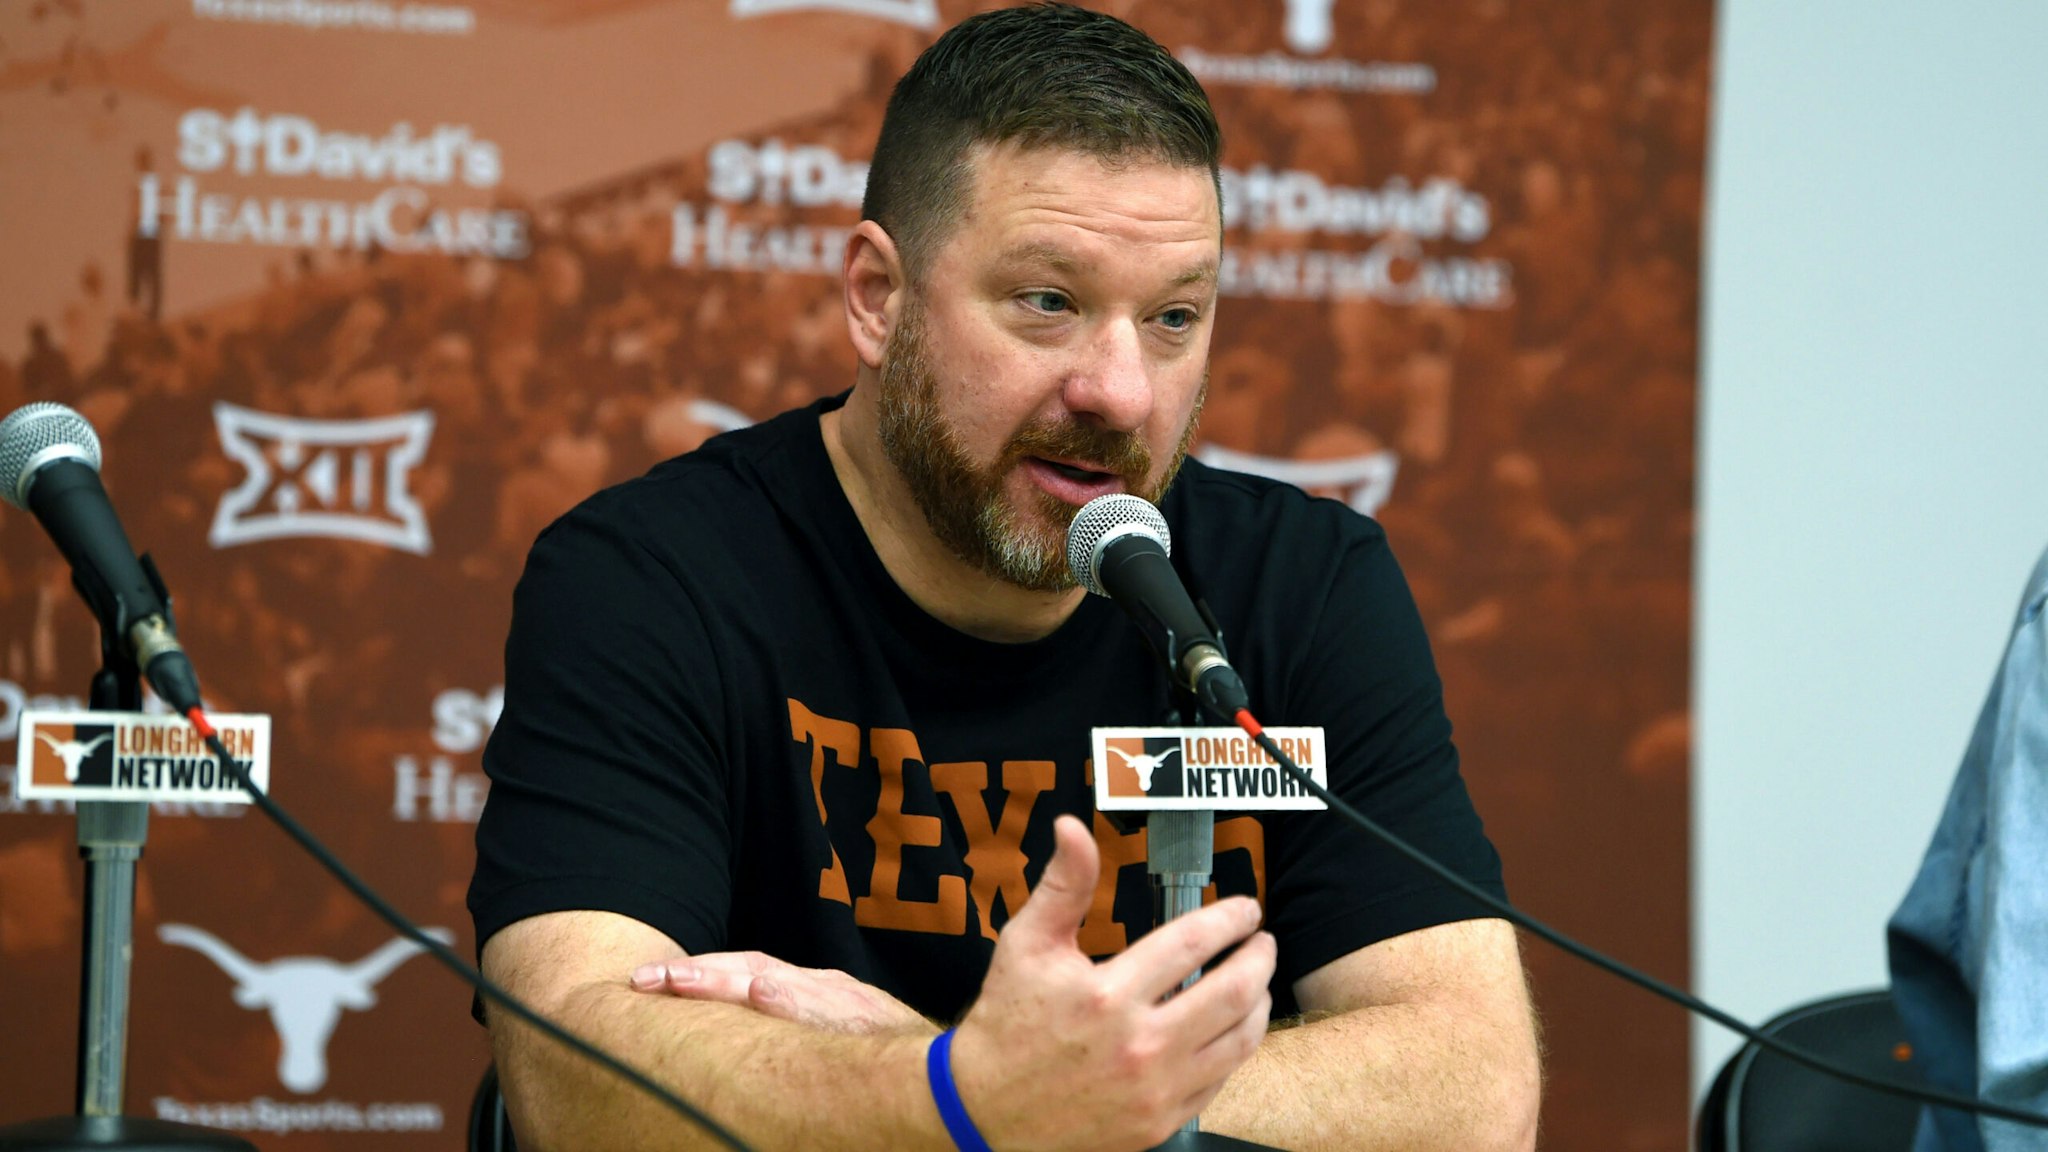 AUSTIN, TX - DECEMBER 10: Texas Longhorns head coach Chris Beard hold a press conference after the game featuring the Texas Longhorns against the Arkansas - Pine Bluff Golden Lions on December 10, 2022 at the Moody Center in Austin, TX.